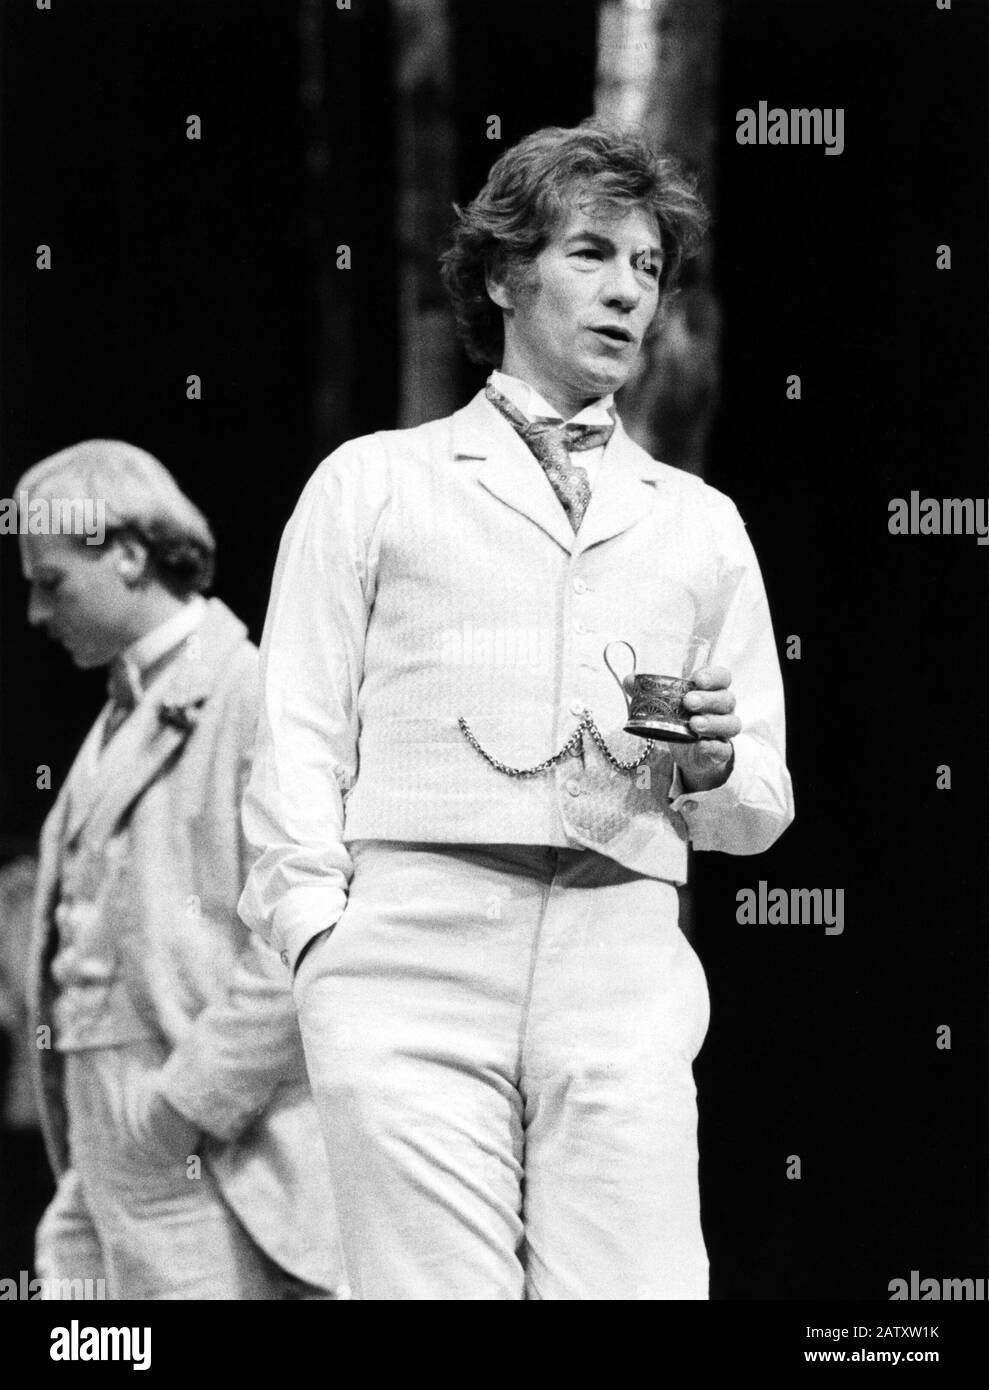 Ian McKellen (Platonov) in WILD HONEY by Michael Frayn after PLATONOV by Anton Chekhov, directed by Christopher Morahan at the National Theatre (NT), London in 1984. Sir Ian Murray McKellen, born 1939, Burnley, England. English stage and film actor. Co-founder of Stonewall, gay rights activist, knighted in 1990, made a Companion of Honour 2007. Stock Photo